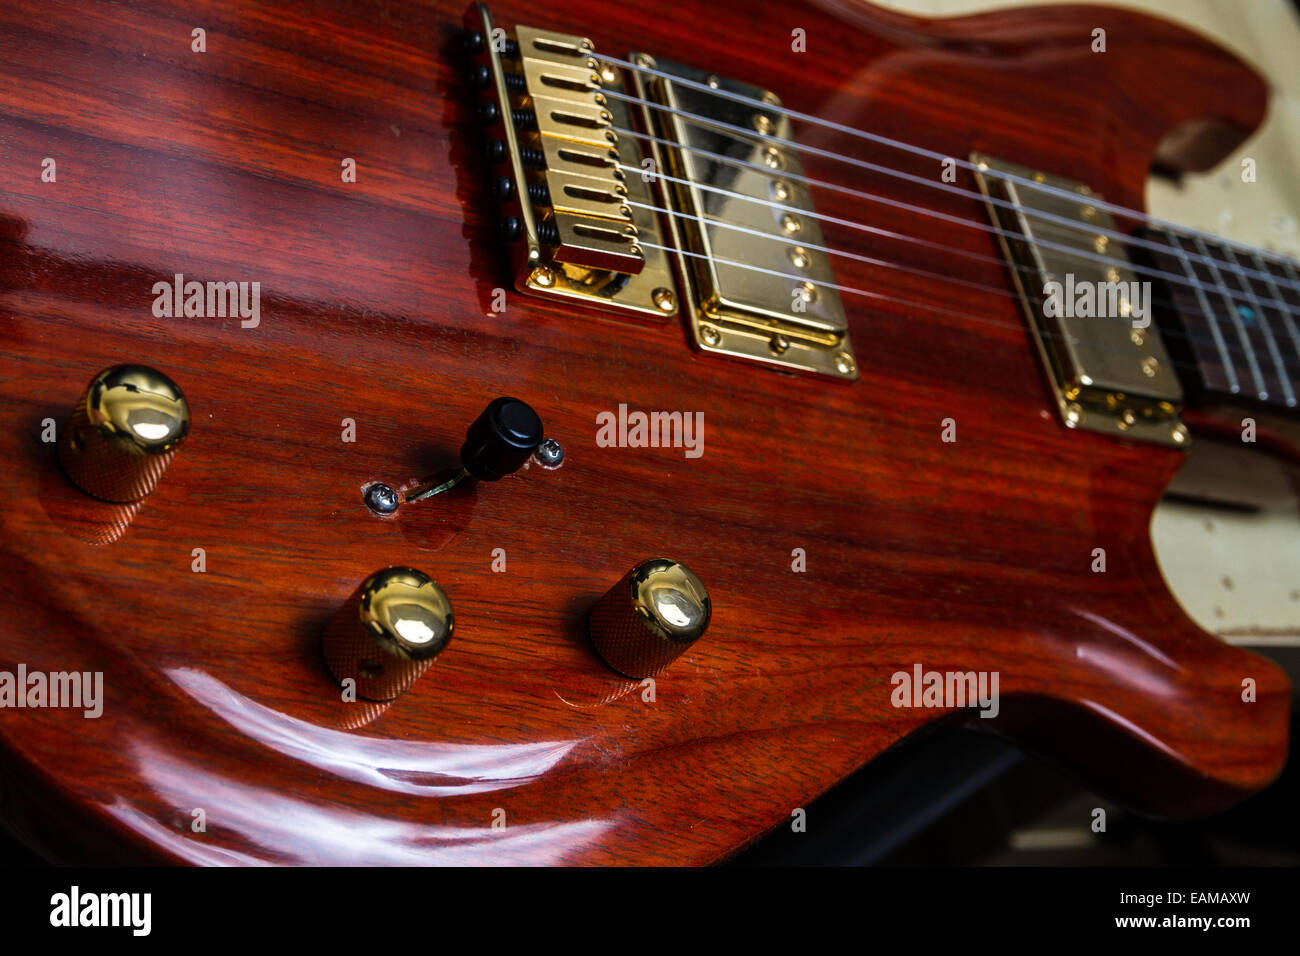 A custom made Guitar from exotic wood Padouk with Gold hardware Stock Photo  - Alamy